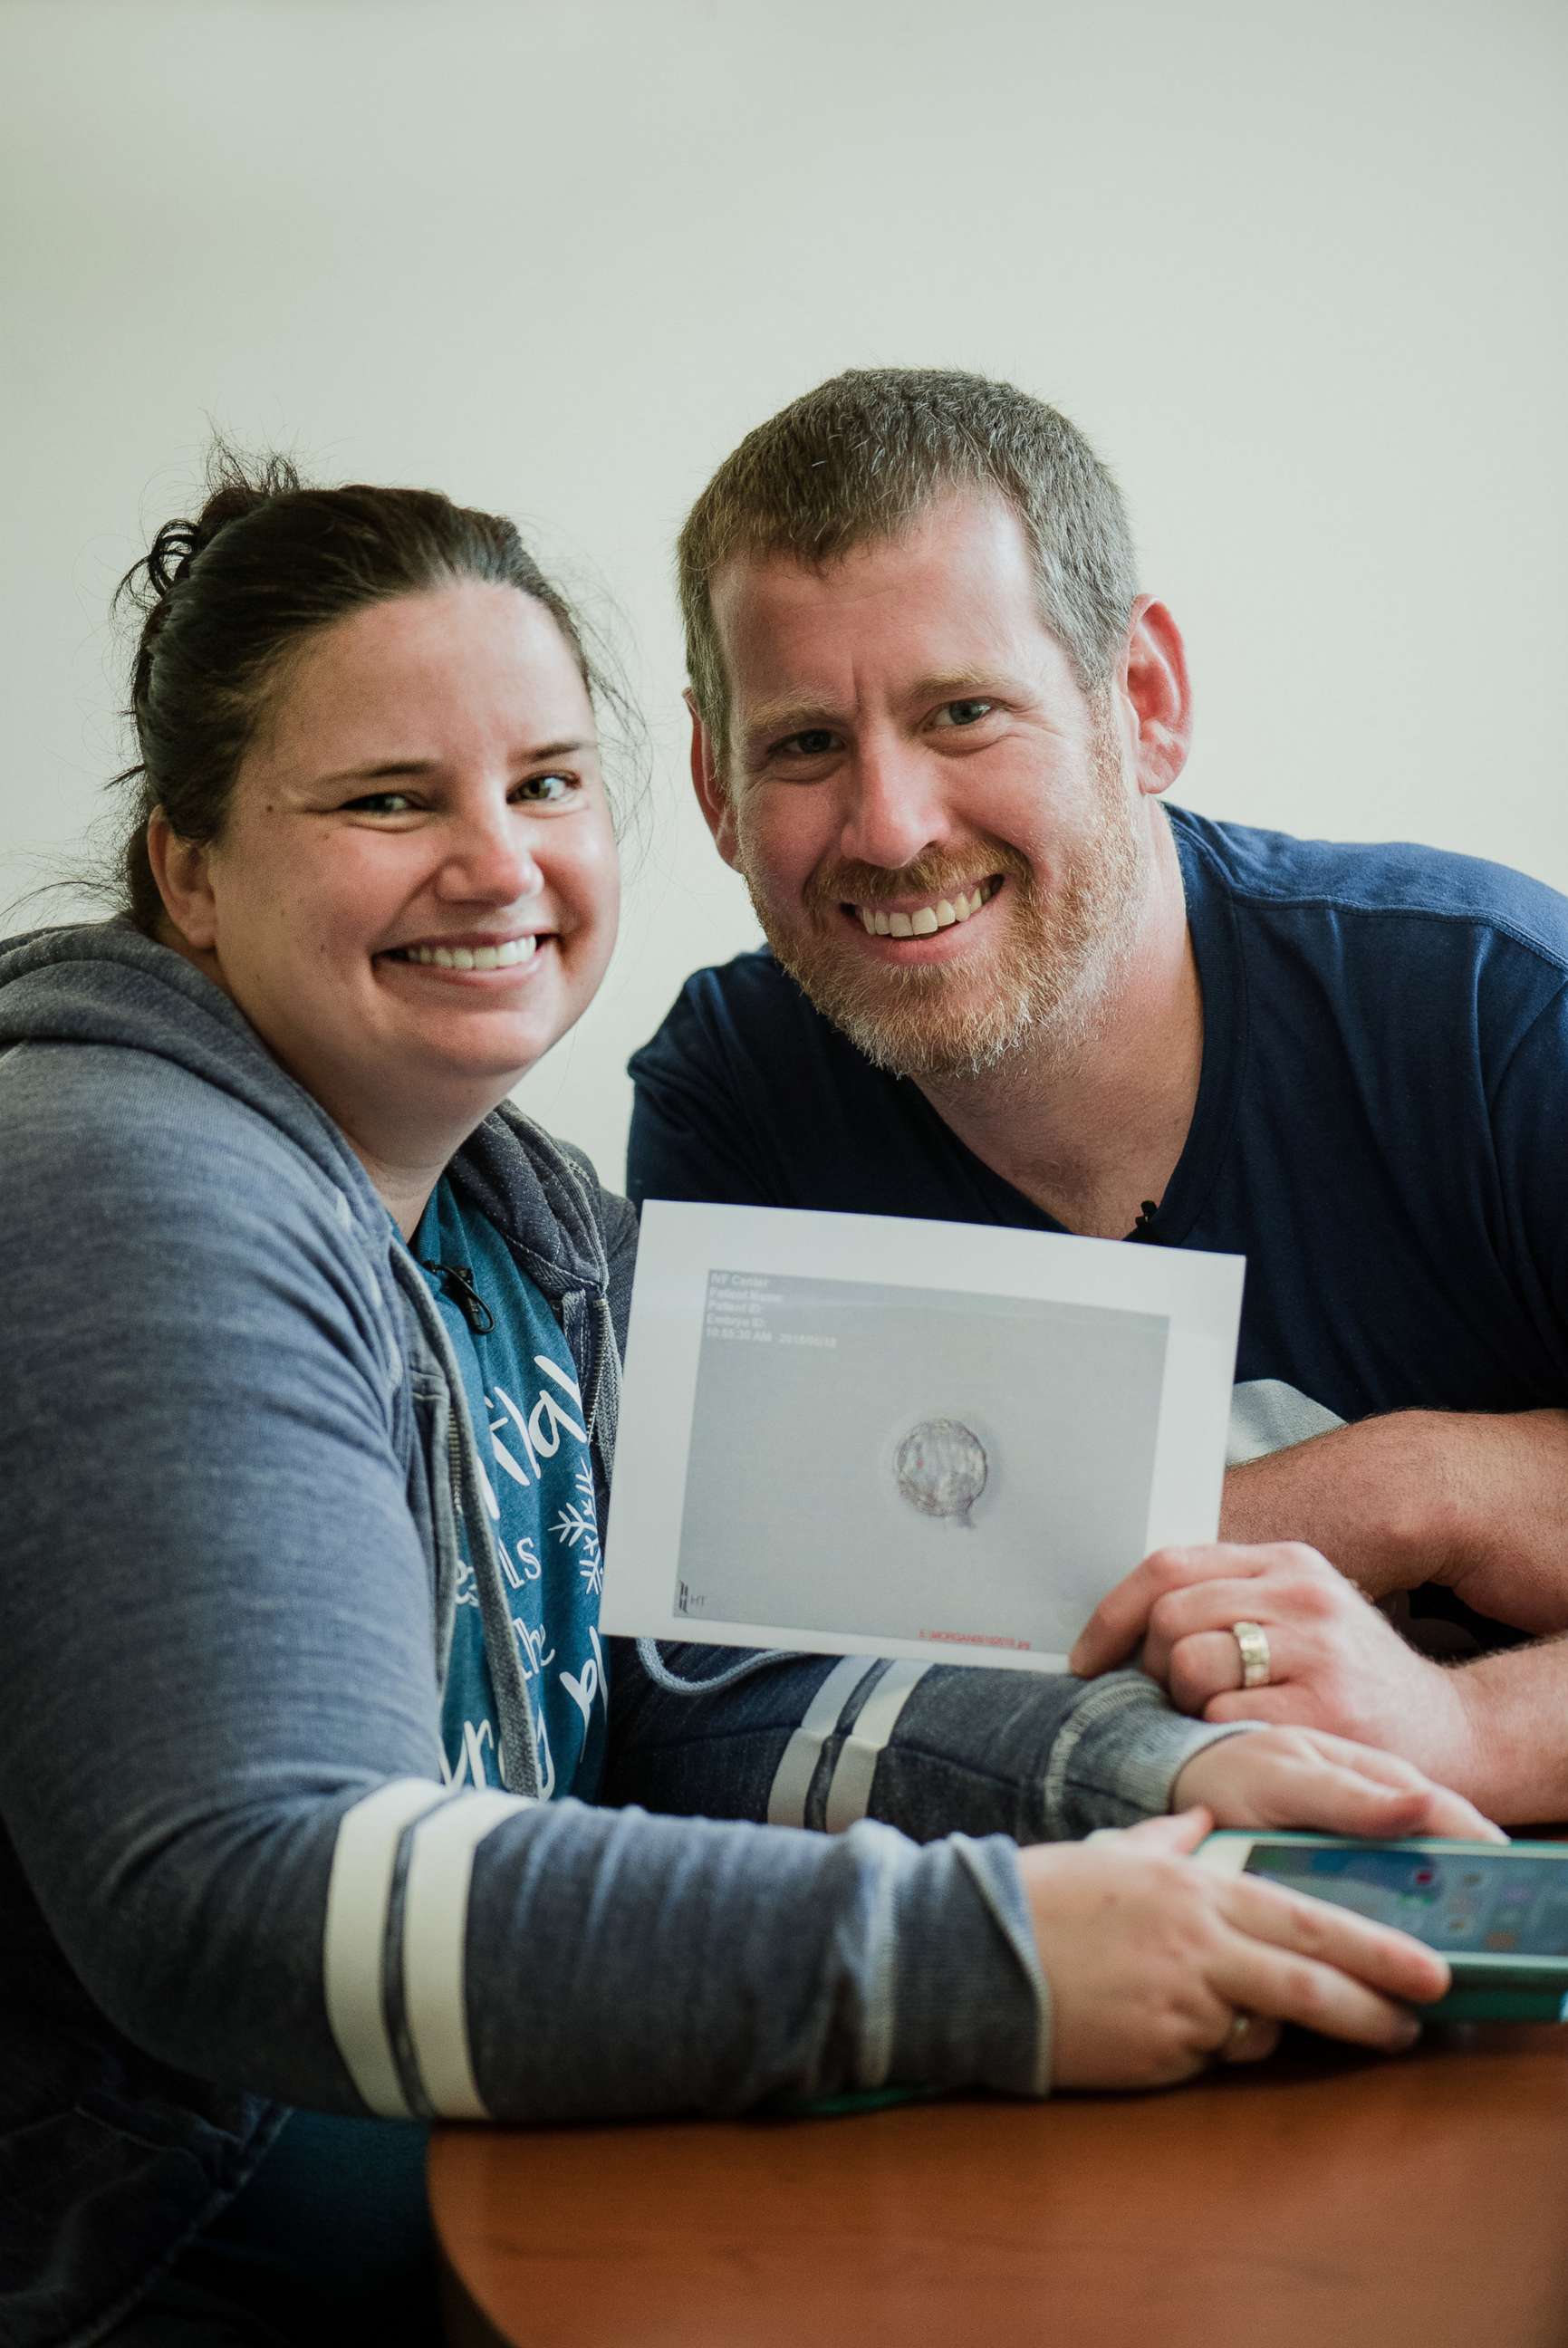 PHOTO: Kerri and Chris Morgan, of Wappingers Falls, N.Y., adopted two embryos through the National Registry for Adoption in their path to parenthood.